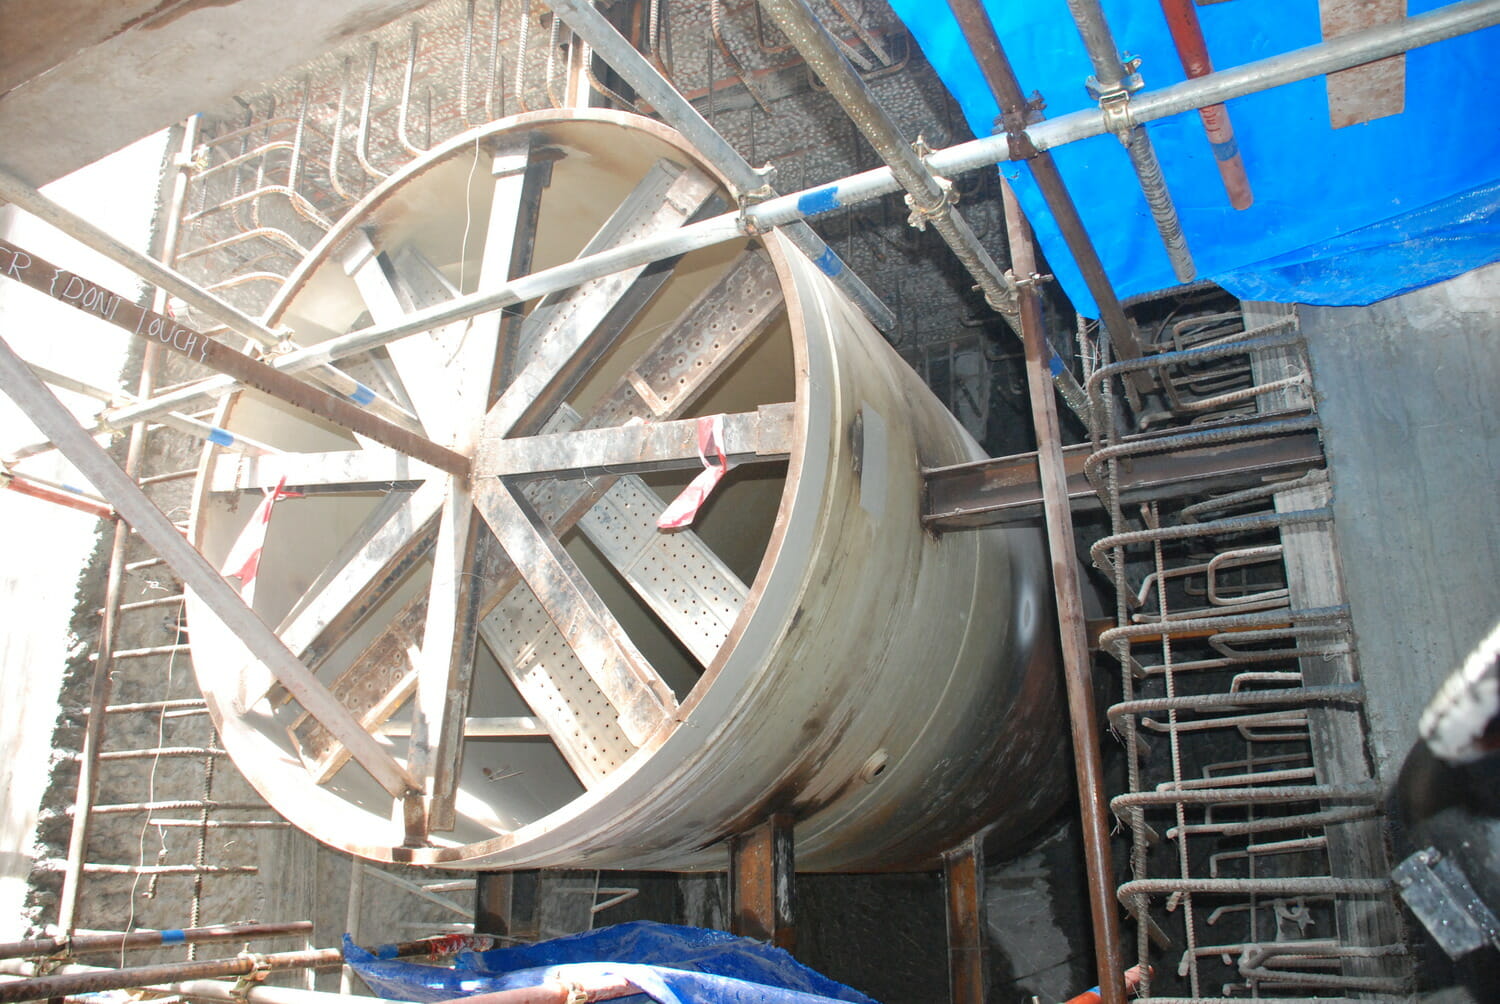 A large metal wheel is being installed in a building.